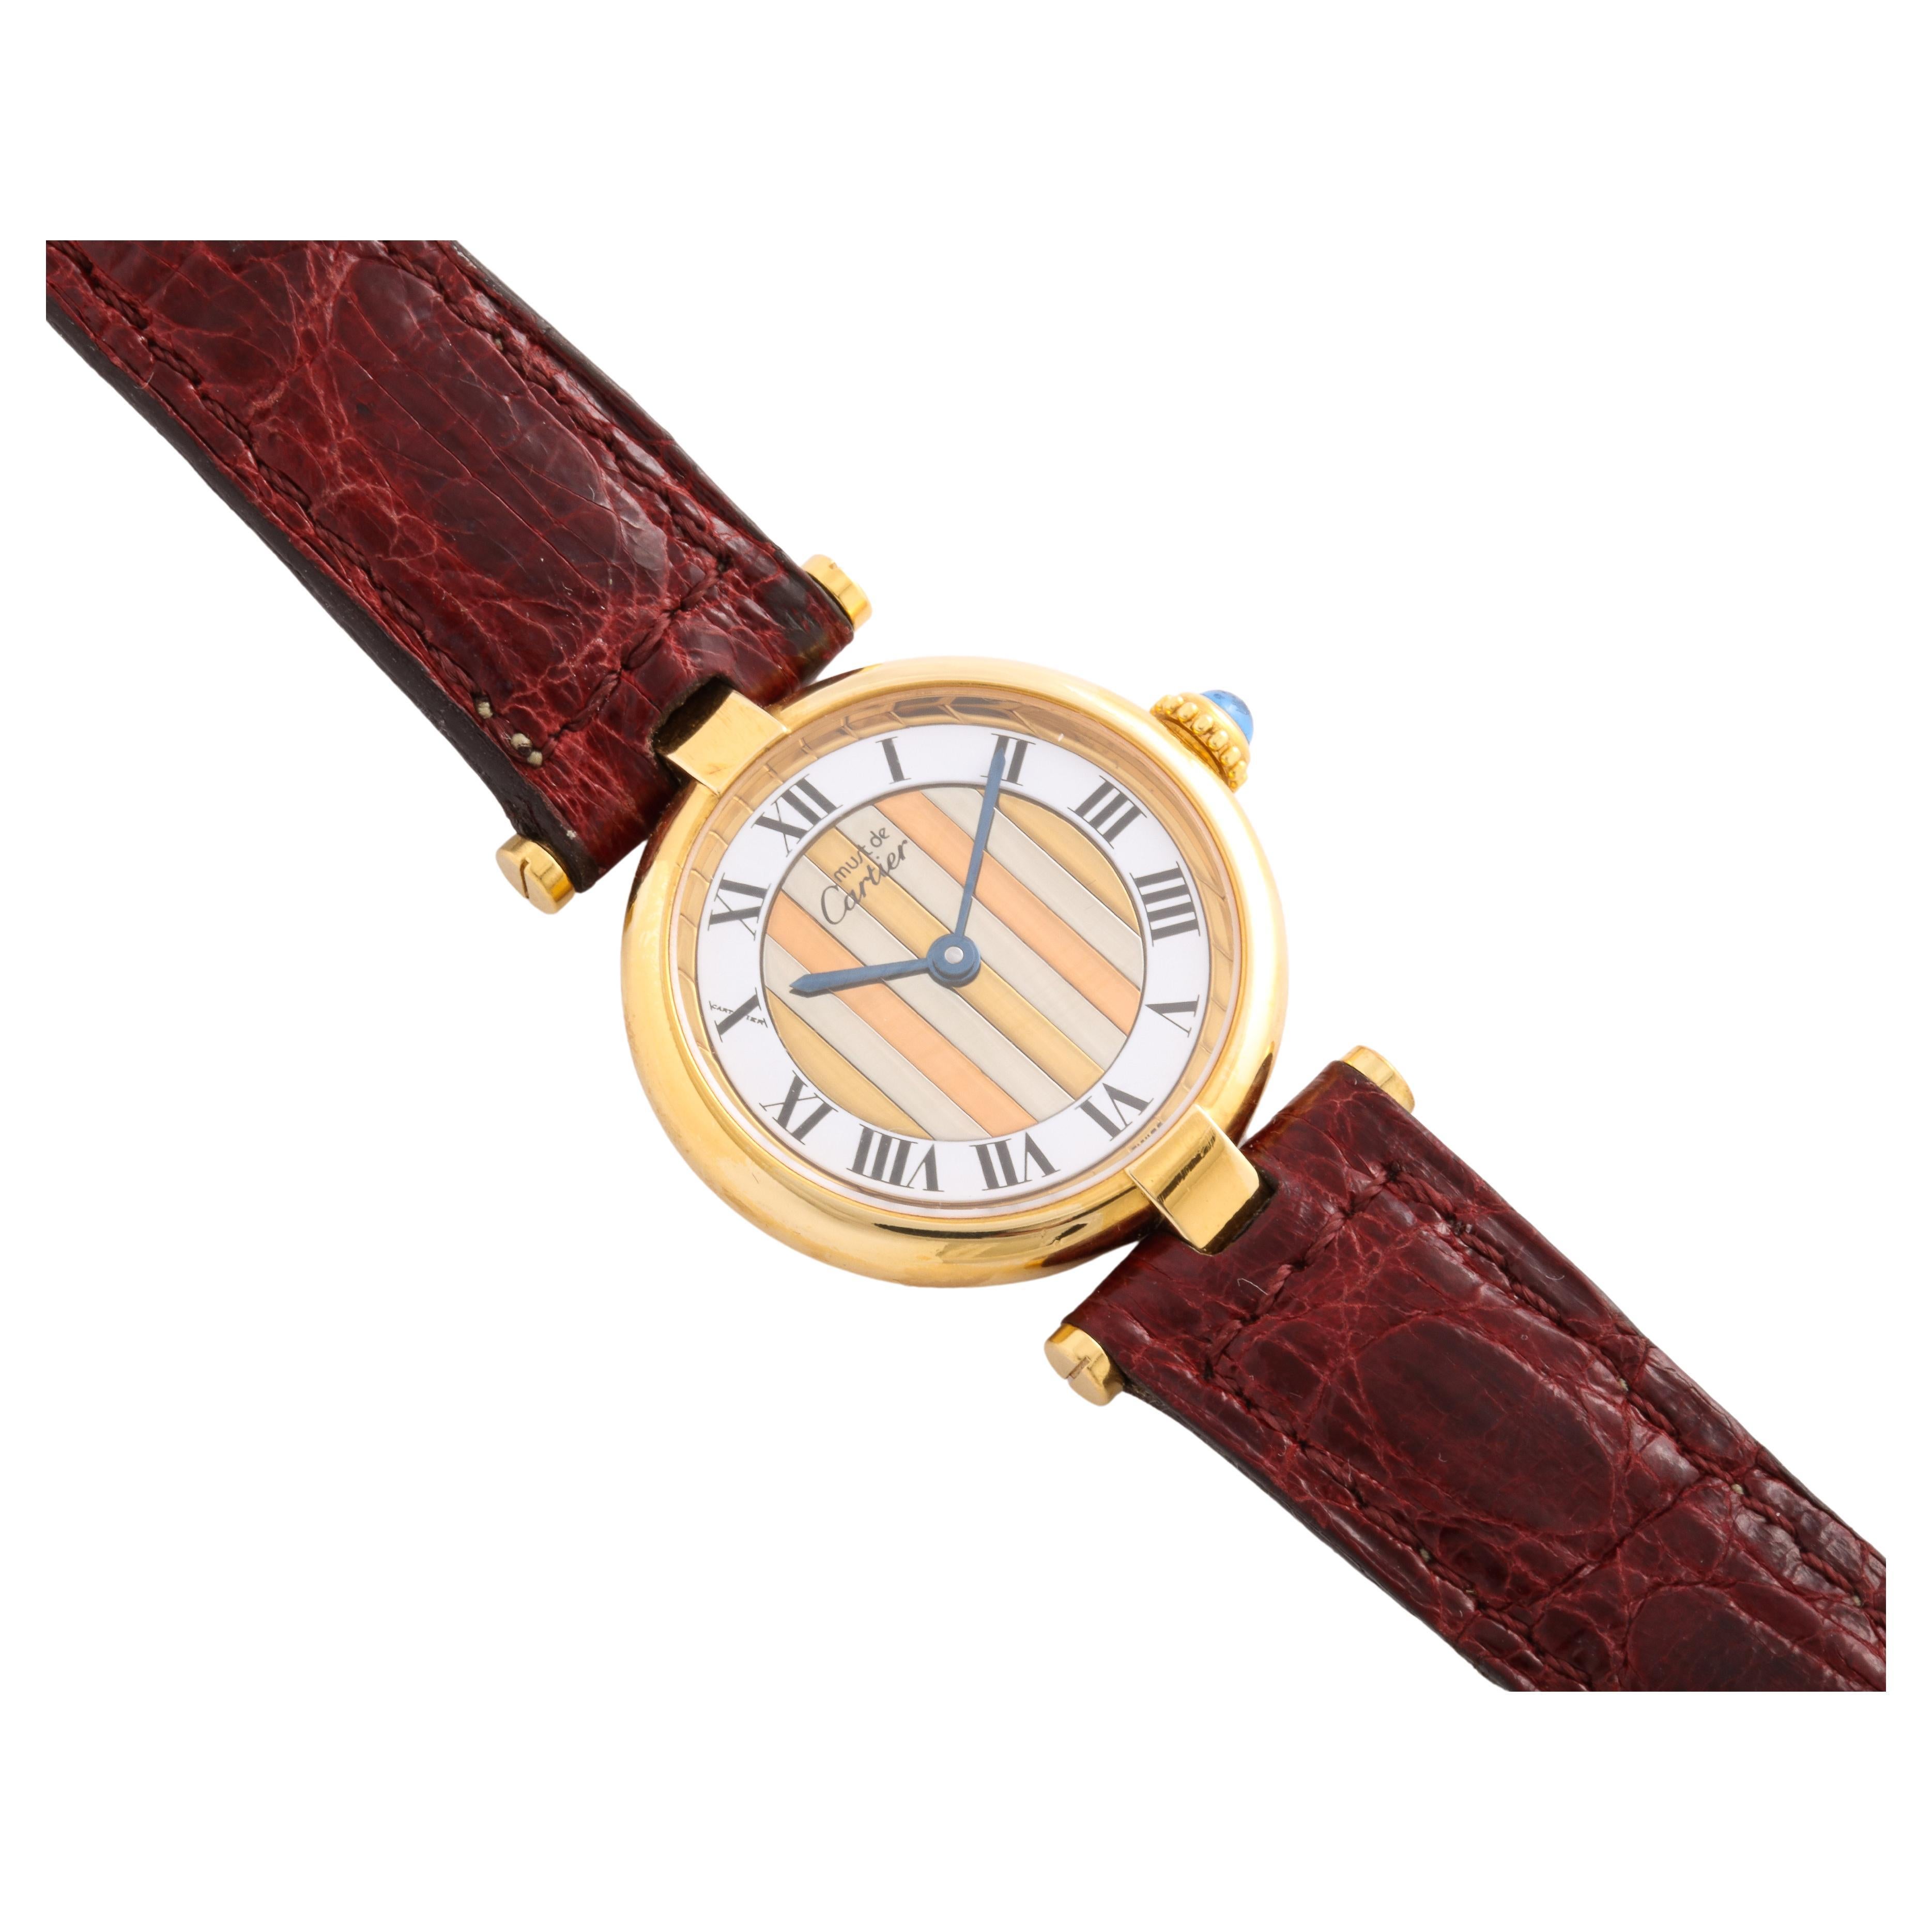 An authentic Cartier Round Faced Trinity watch in a classic Cartier design with Sapphire stem and executed in Vermeil from Cartier Paris. The Trinity design stands for fidelity, friendship and love. It is difficult to find fine Vintage Watches and